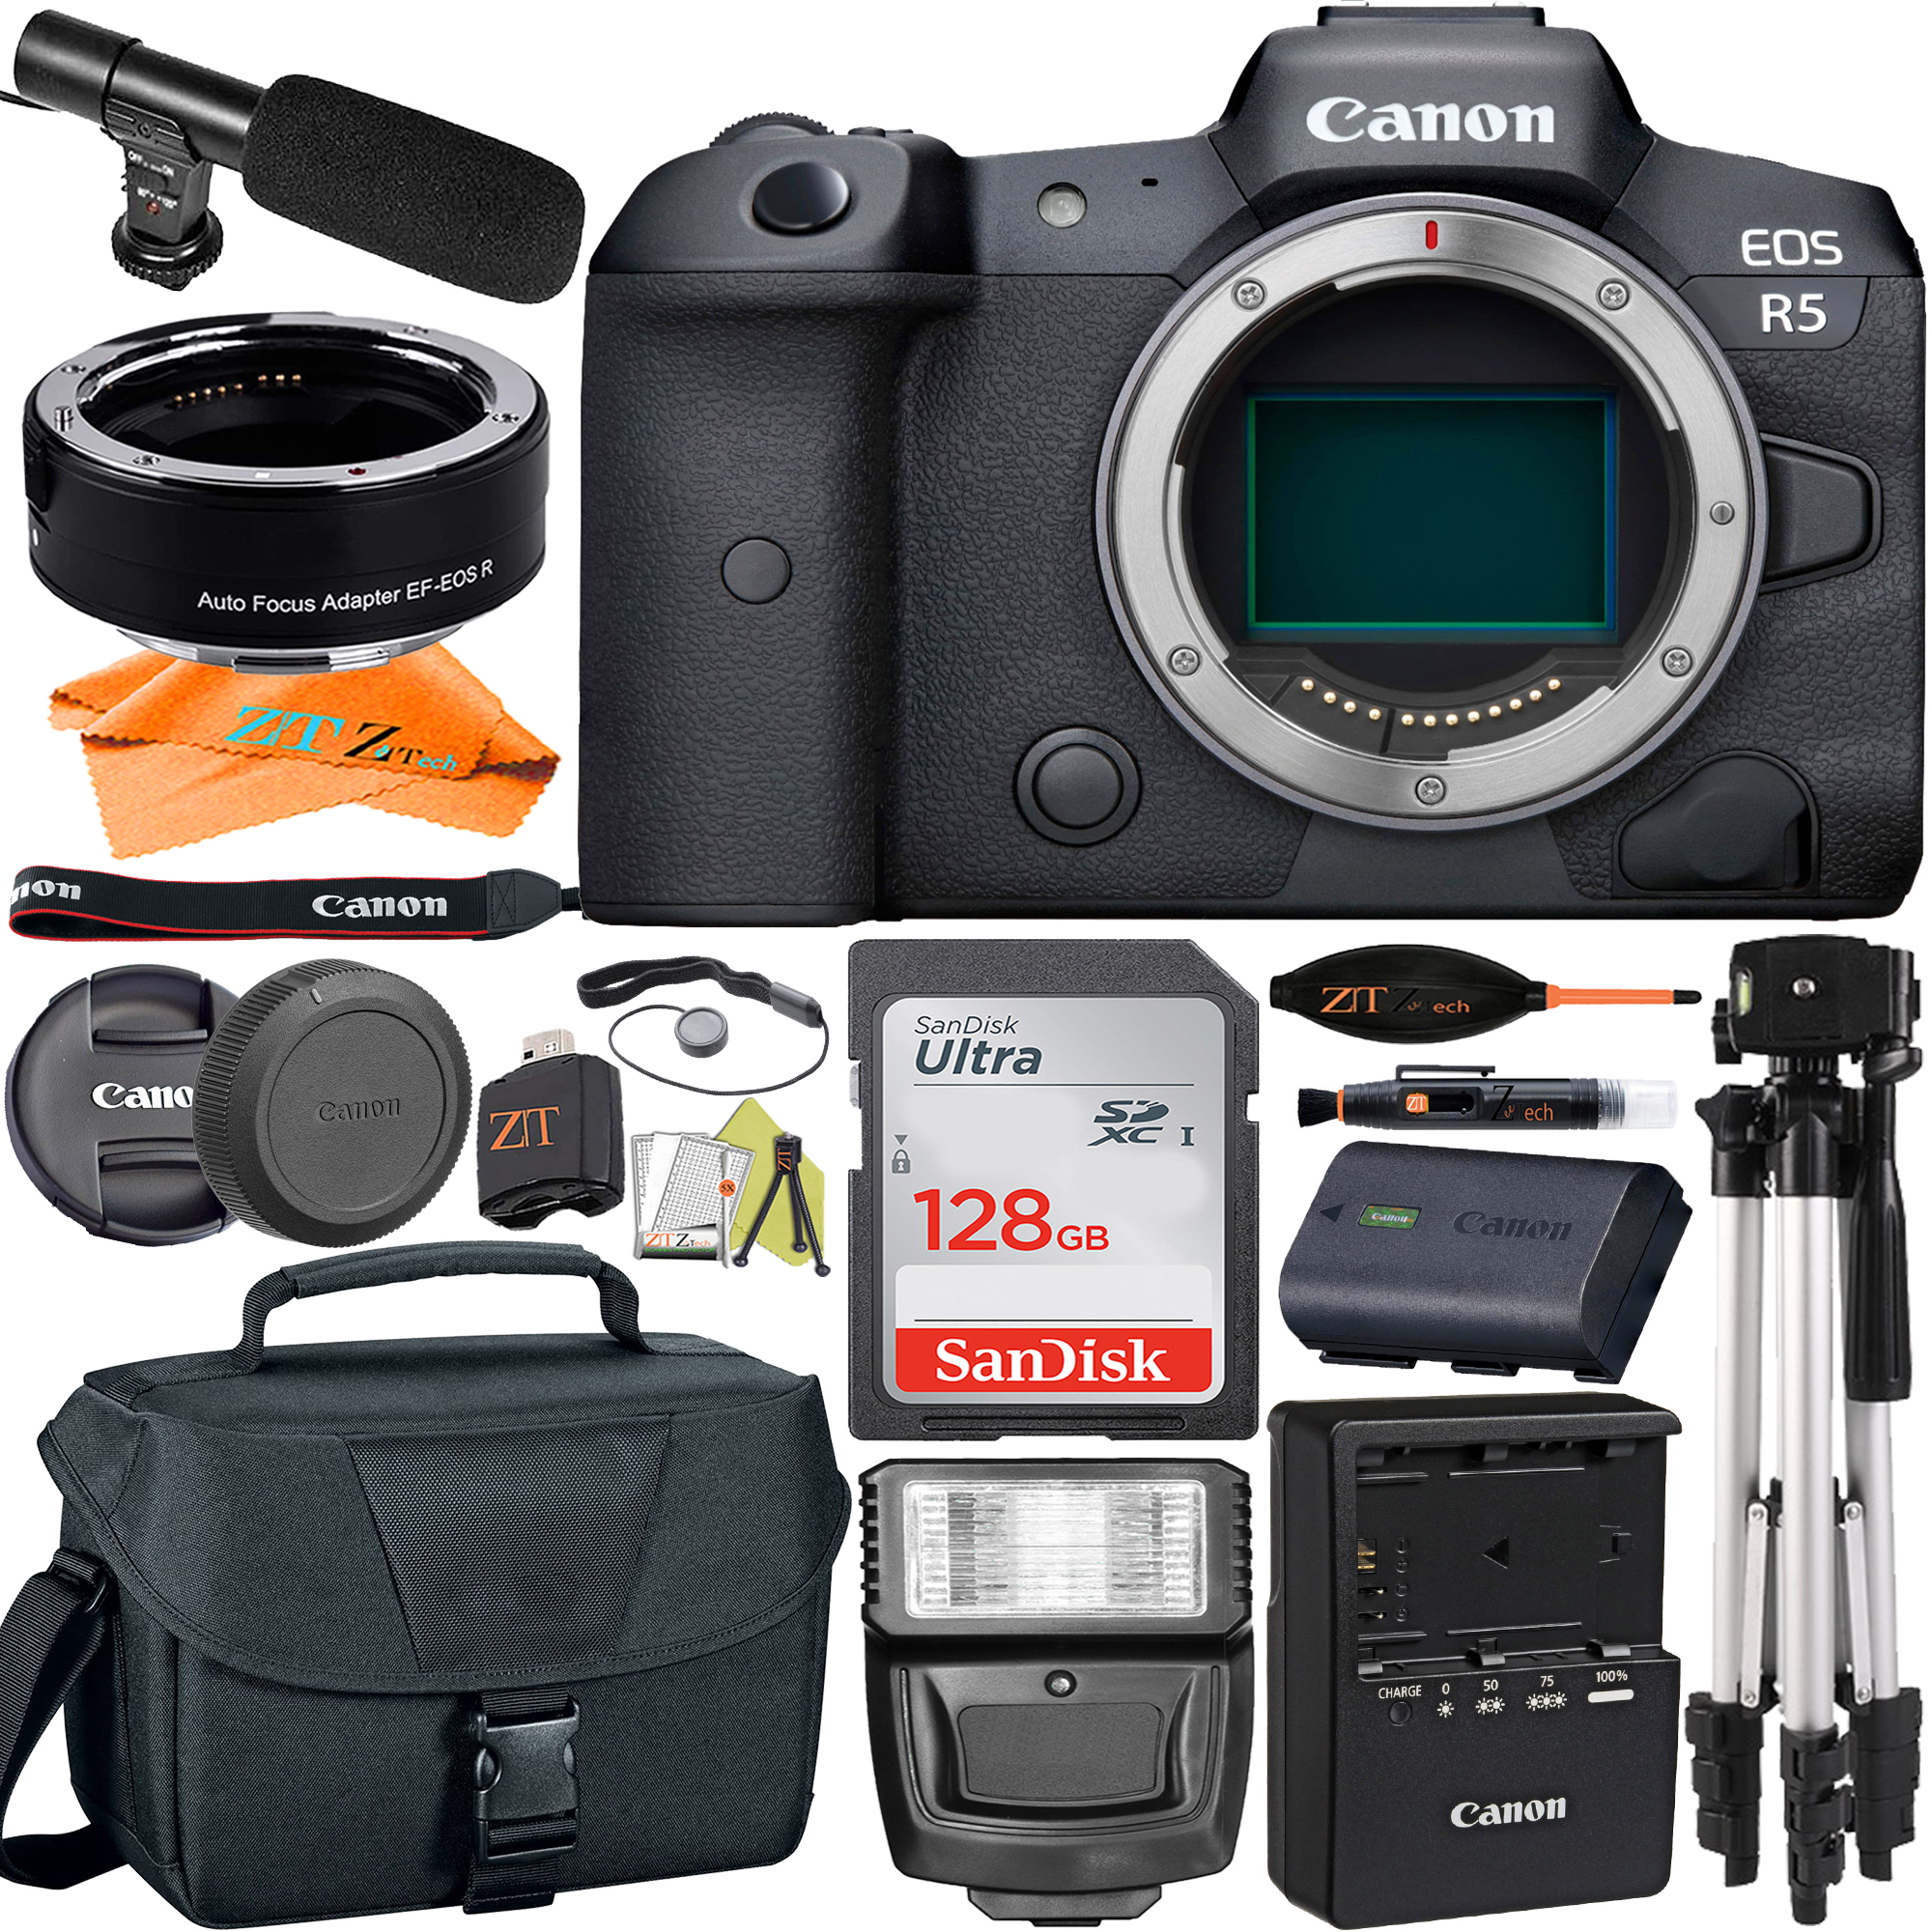 Canon EOS R5 Mirrorless Digital Camera (Body Only) with Mount Adapter + SanDisk 128GB + Case + ZeeTech Accessory Bundle